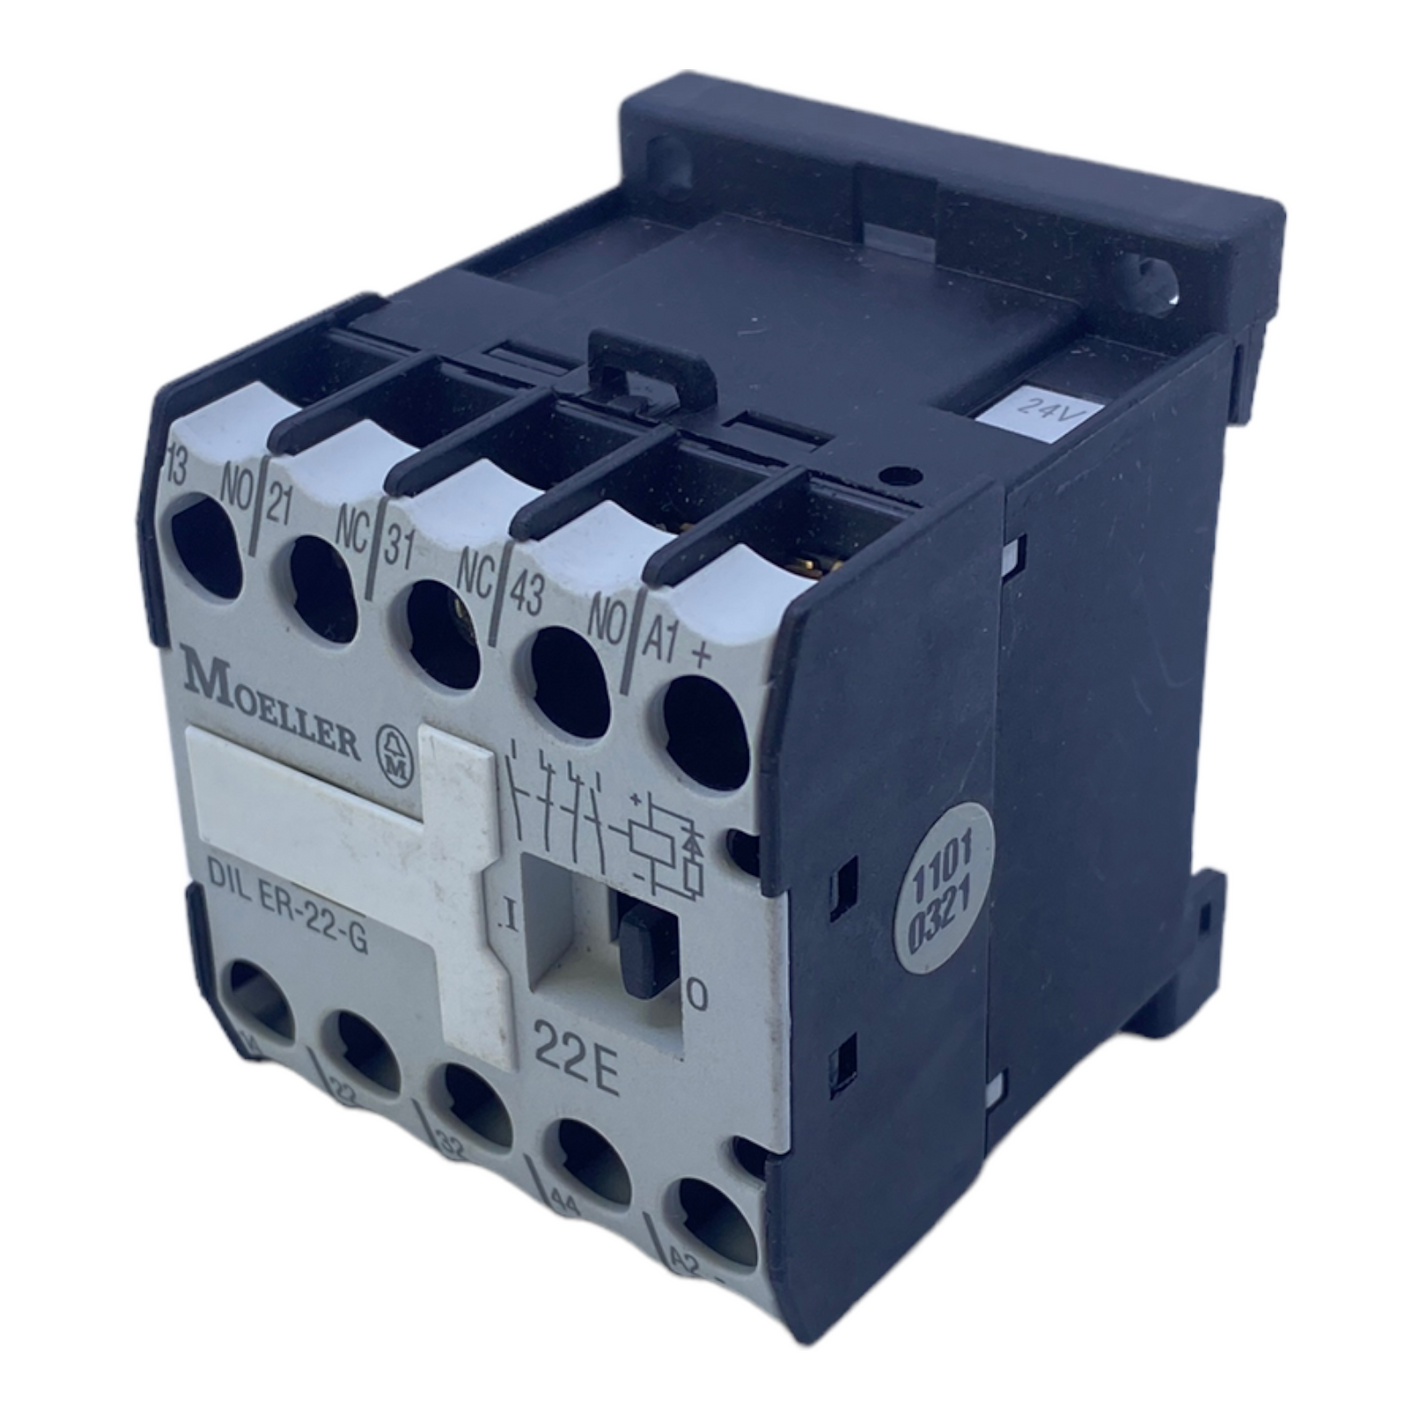 Moeller DILER-22-G power contactor 24V DC 6A 2 openers 2 closers 